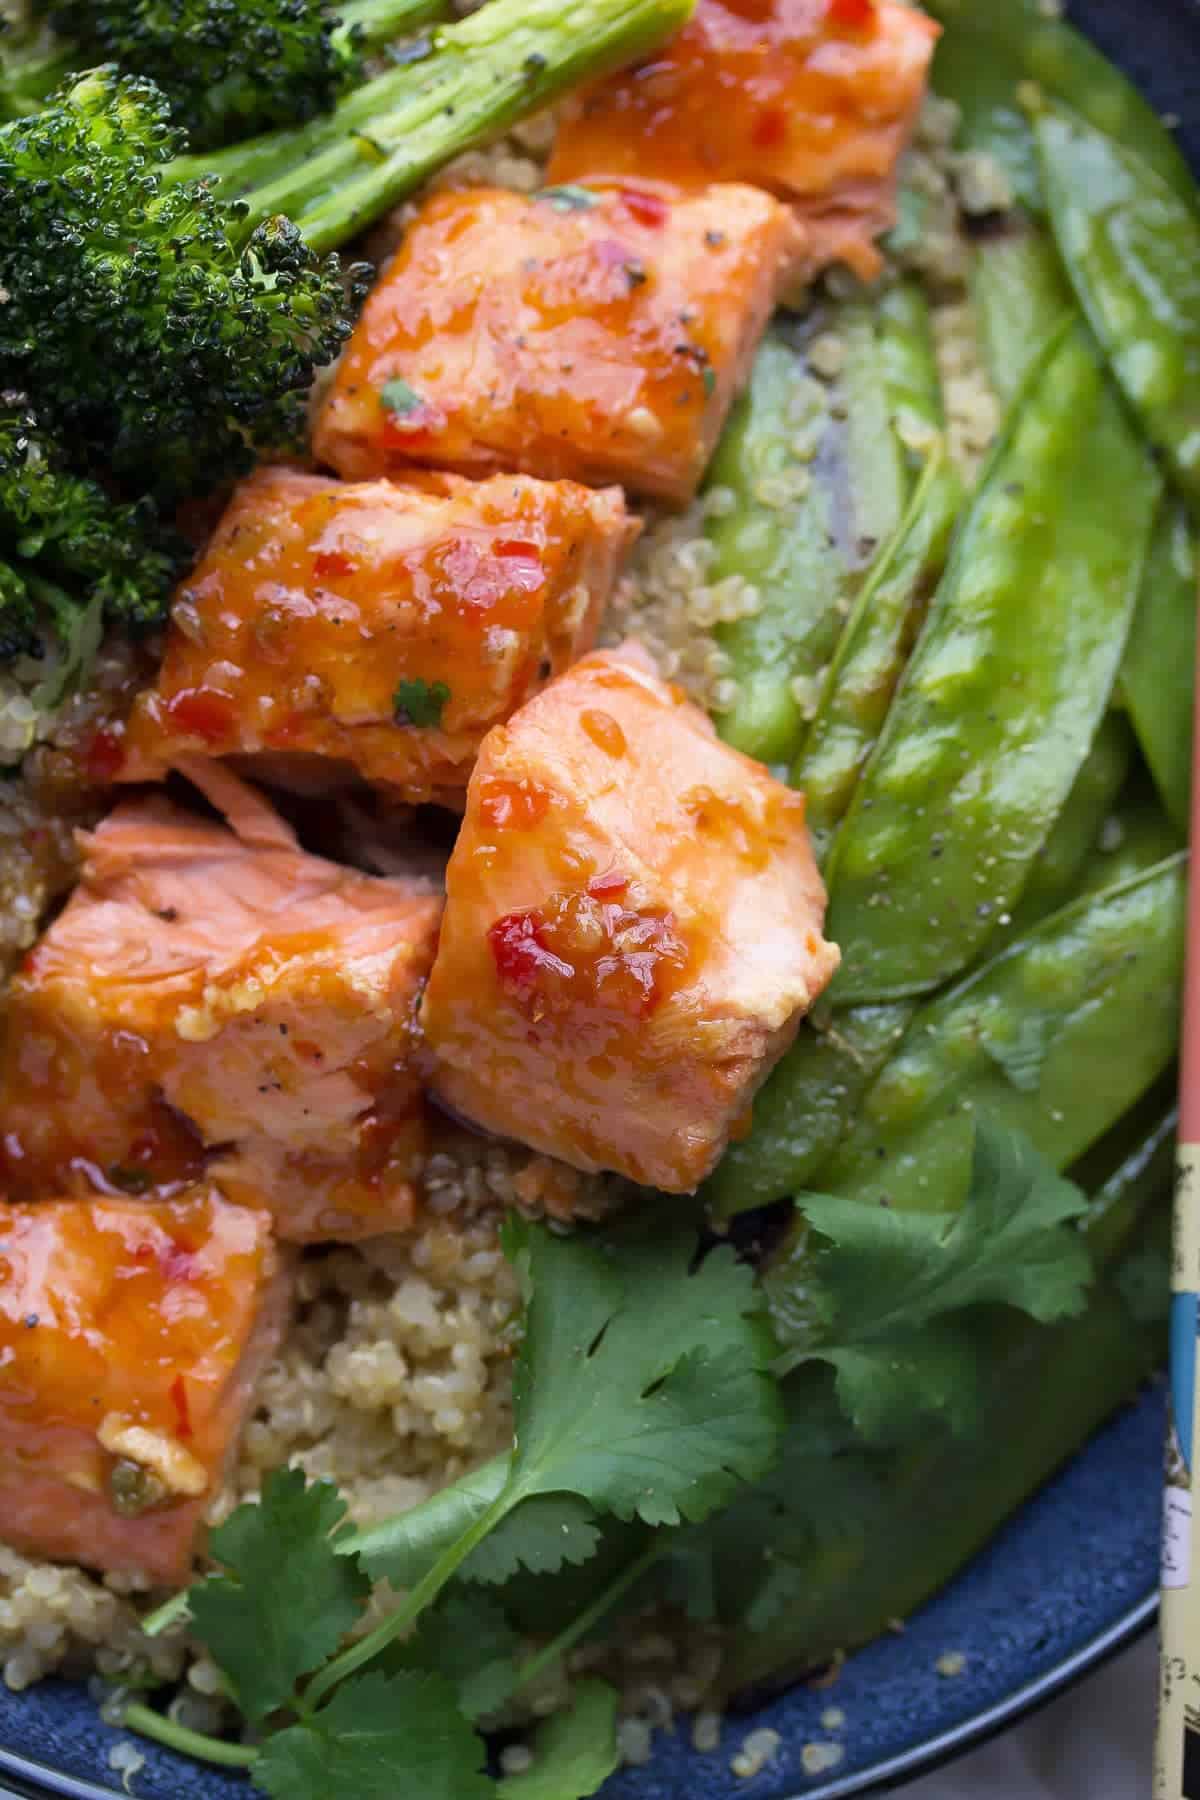 A delicious and healthy dinner recipe: sweet chili salmon is served with roasted broccoli and snap peas on a quinoa bowl! Makes a great lunch, as well.